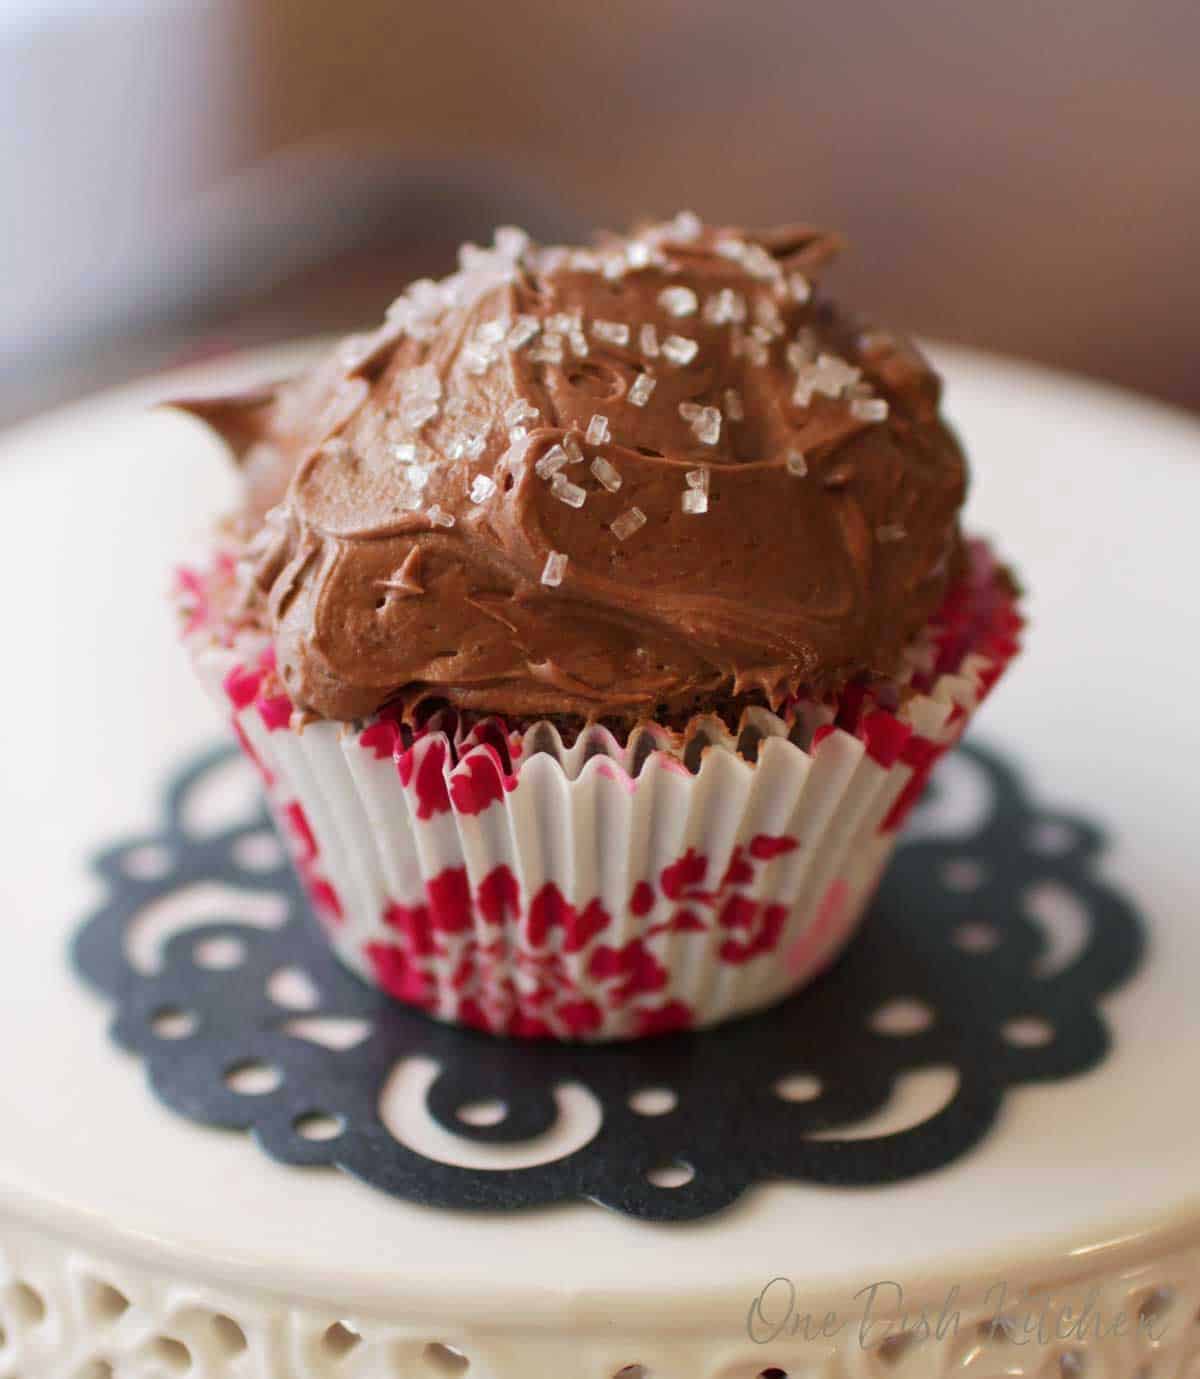 A chocolate cupcake topped with chocolate icing and white crystal sprinkles on a cake stand